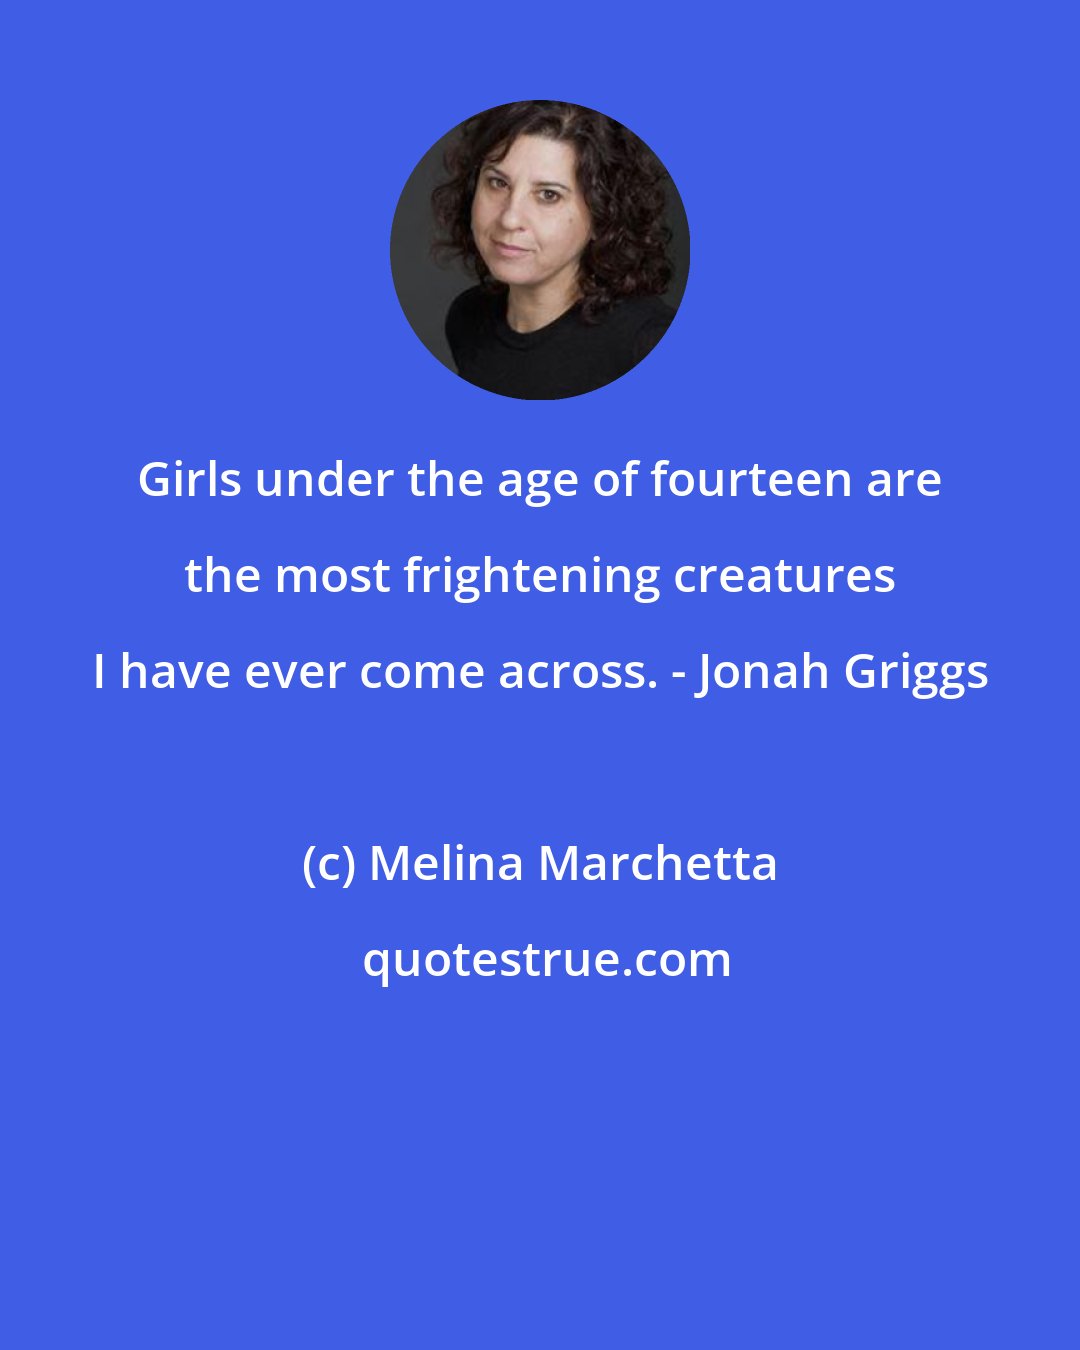 Melina Marchetta: Girls under the age of fourteen are the most frightening creatures I have ever come across. - Jonah Griggs